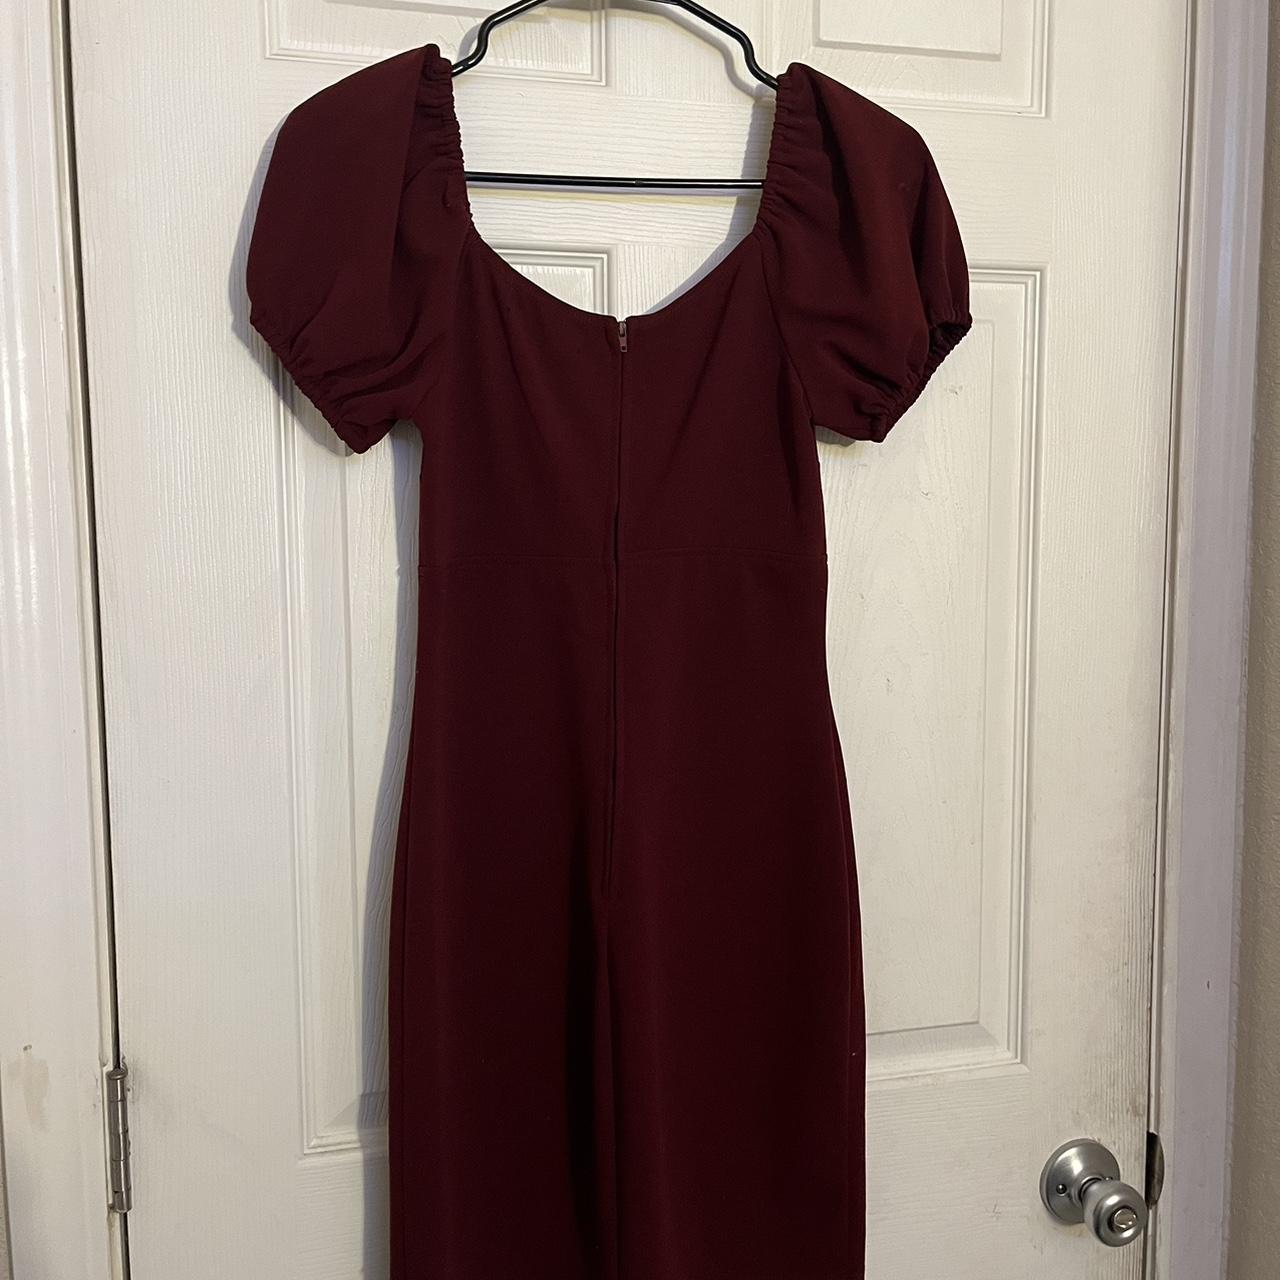 Crystal Doll Women's Burgundy and Red Dress (4)